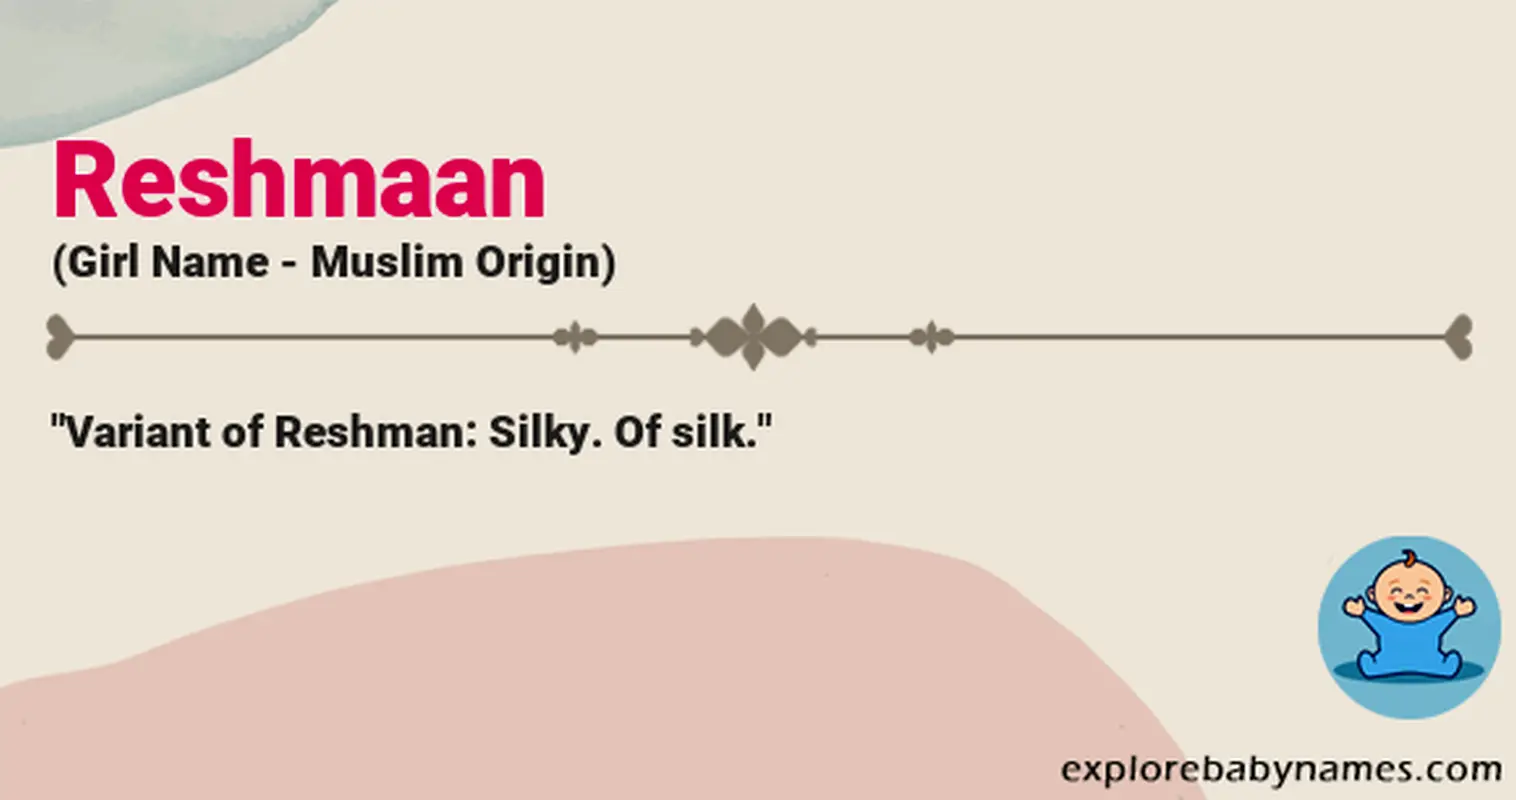 Meaning of Reshmaan